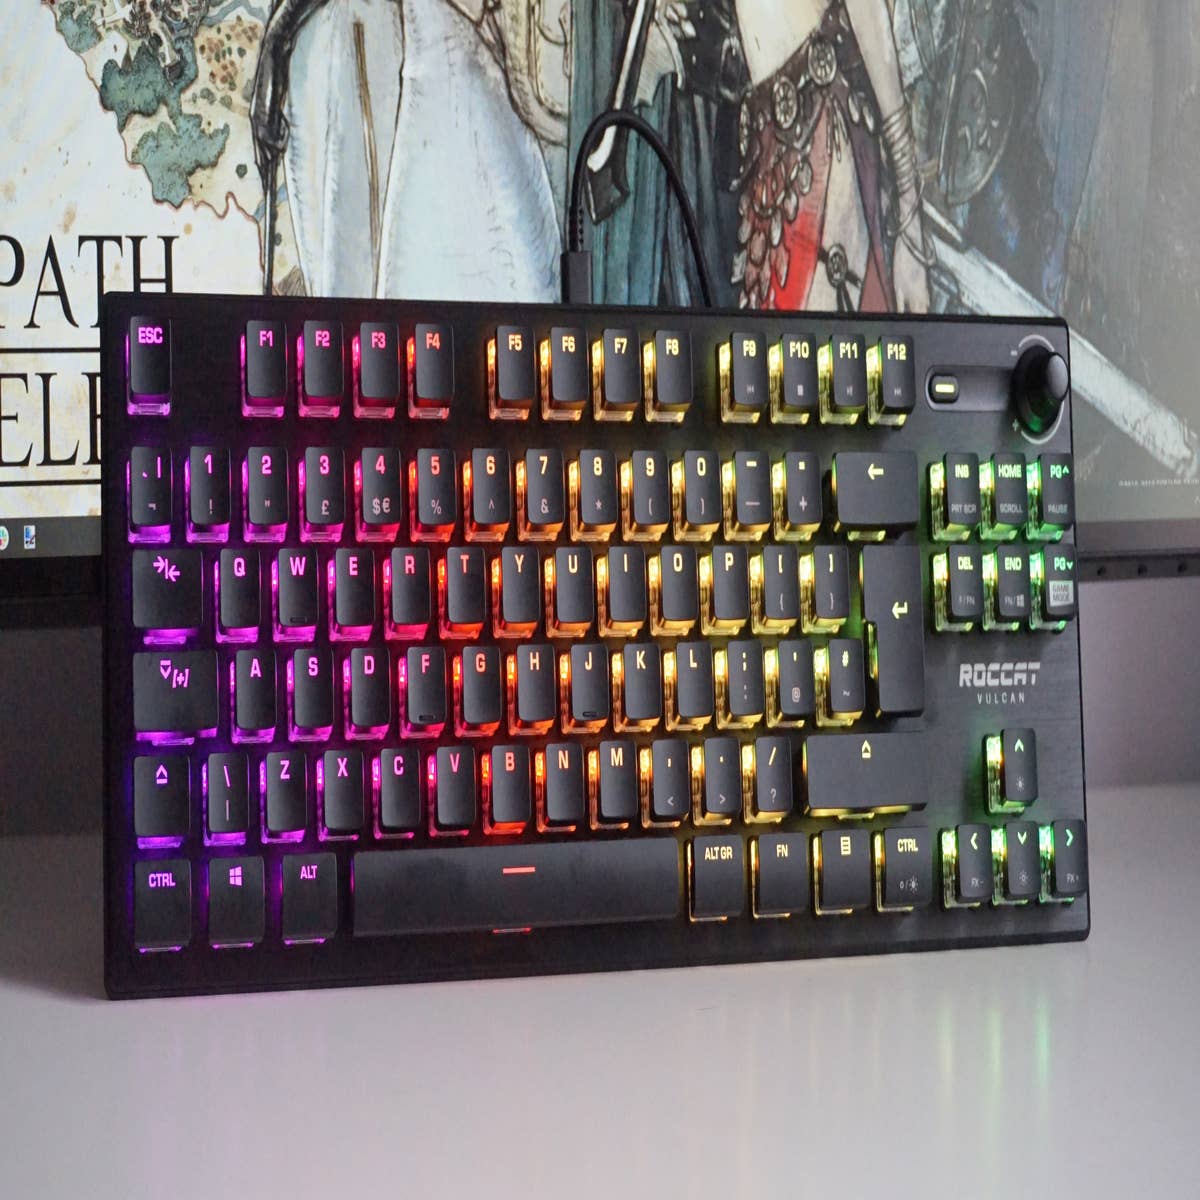 This Brilliant Mechanical Computer Is Built for Gaming